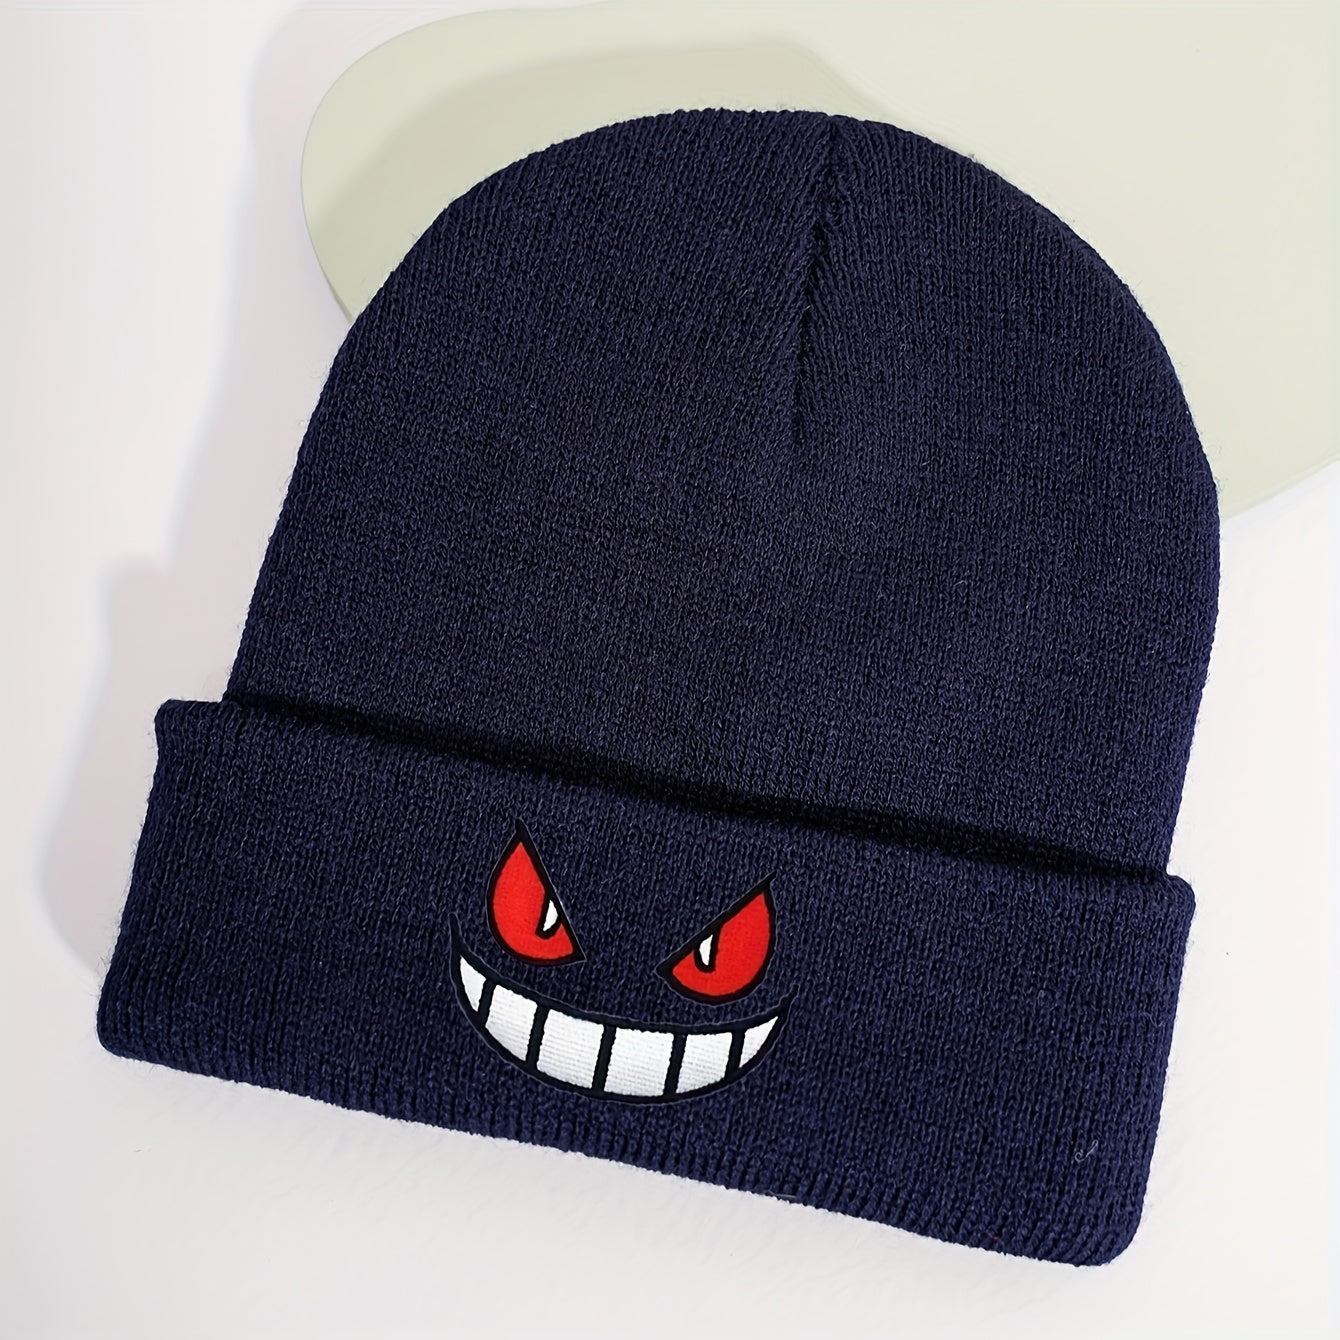 Devil Embroidery Anime Beanie Hip Hop Solid Color Knit Hats Lightweight Elastic Skull Cap Warm Cuffed Beanies For Women & Men